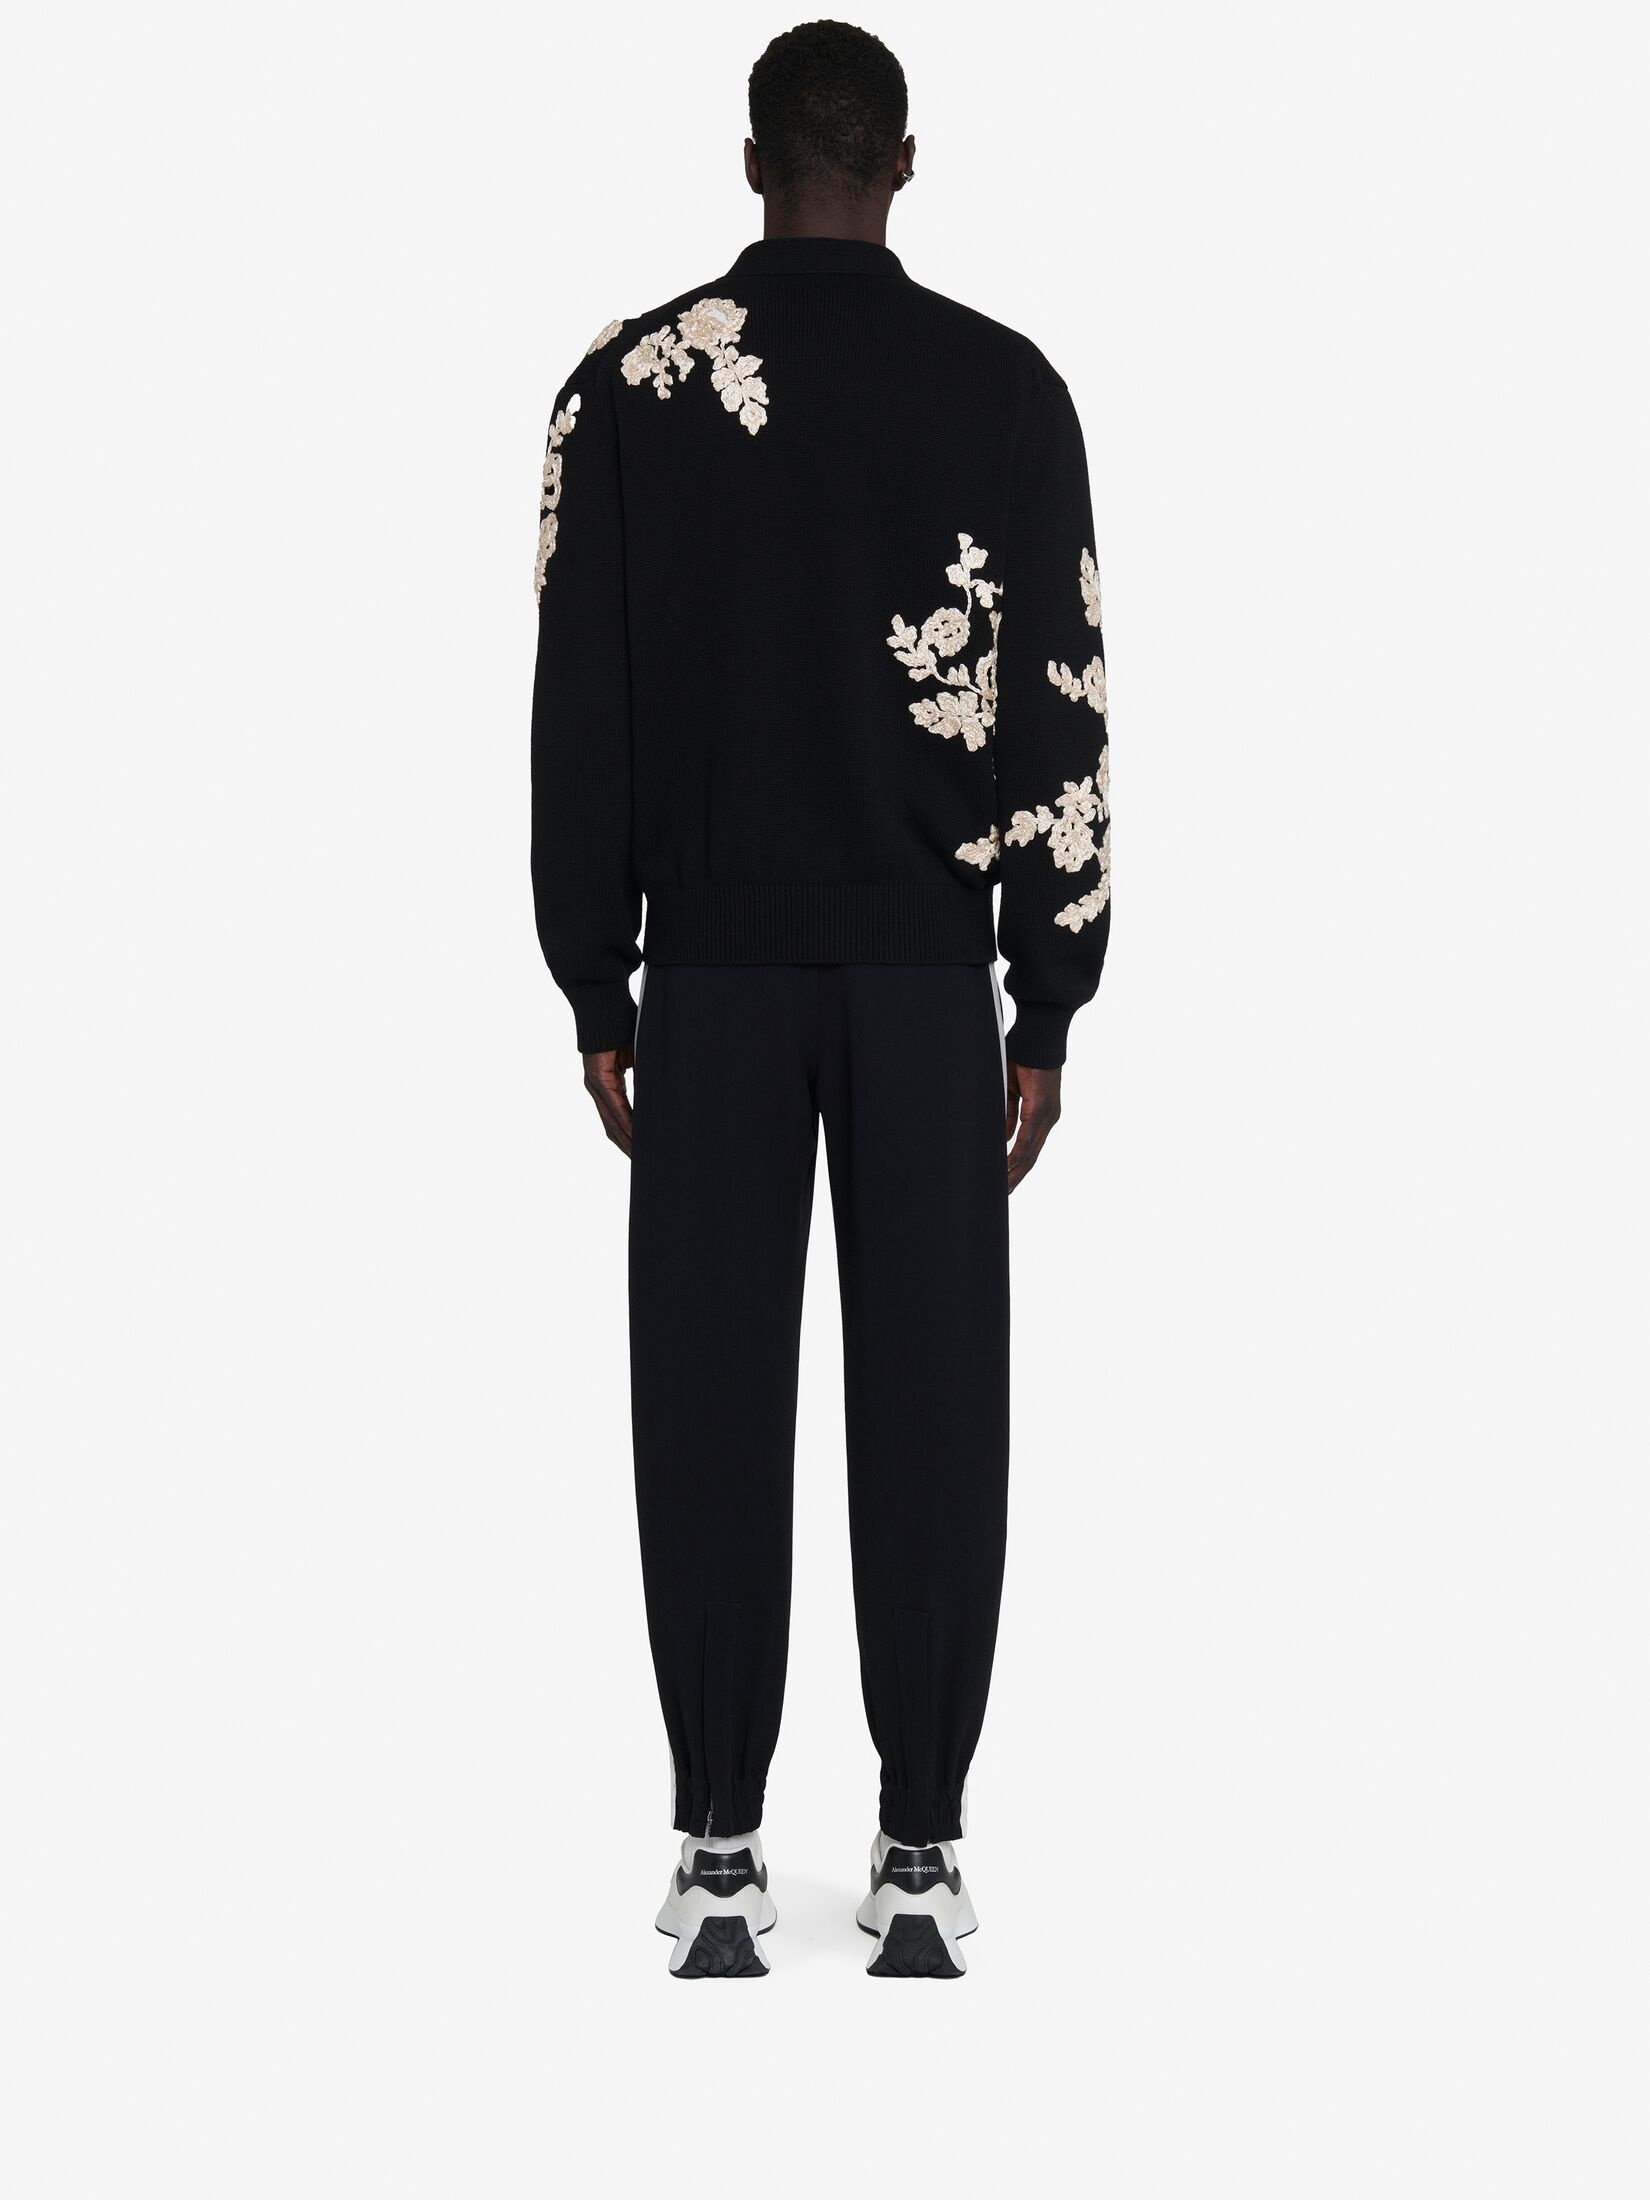 Men's Floral Embroidery Cardigan in Black/ivory - 4